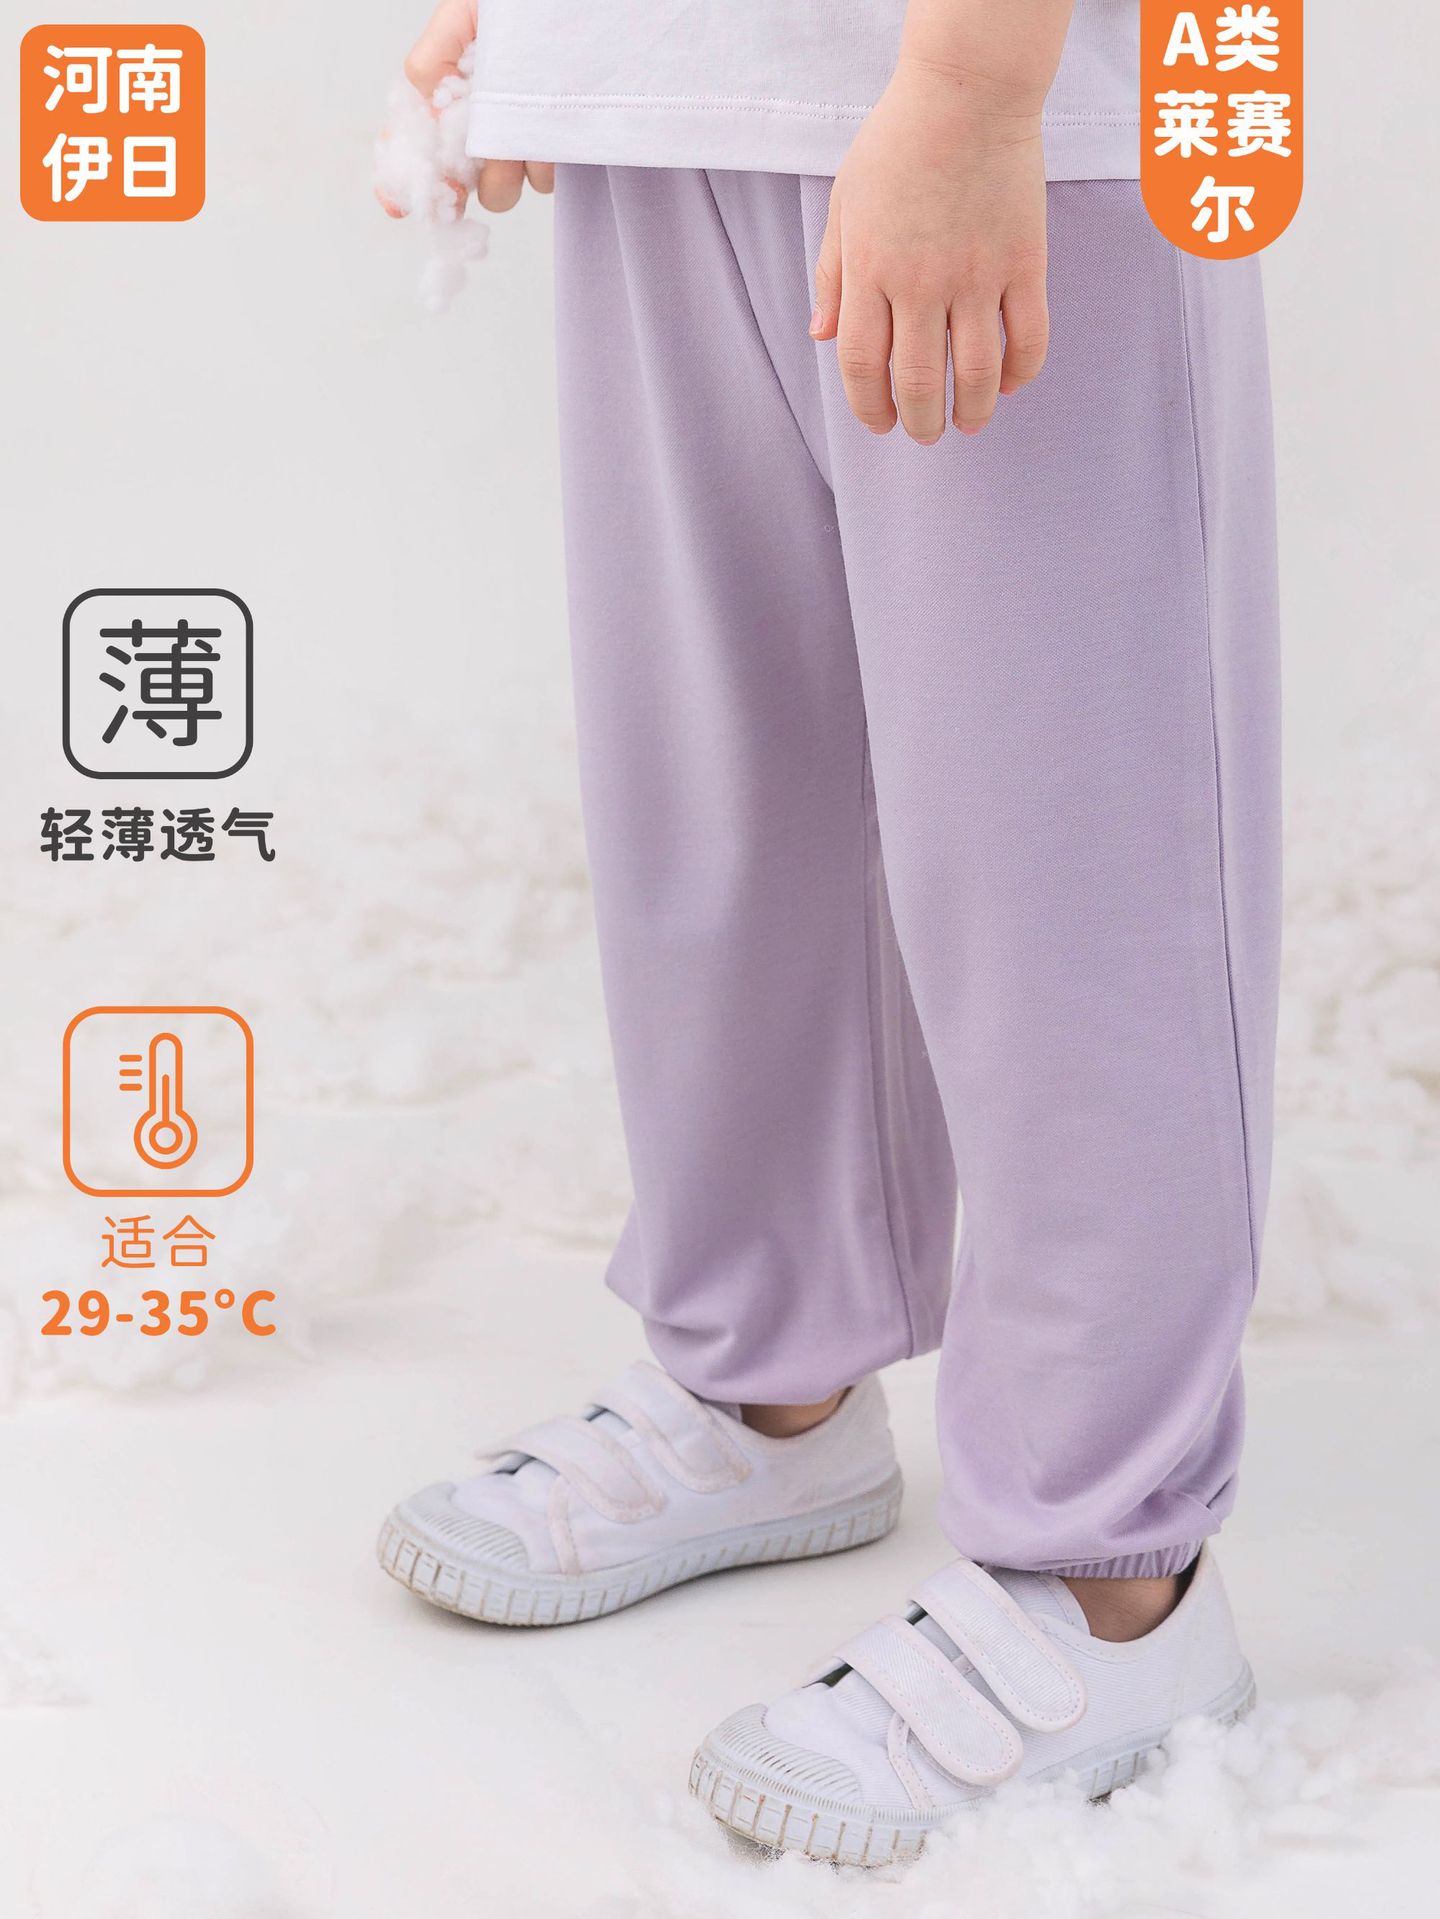 anyang children‘s clothing baby summer anti mosquito pants lyocell ultra-thin breathable pants children‘s two-piece suit children home pants